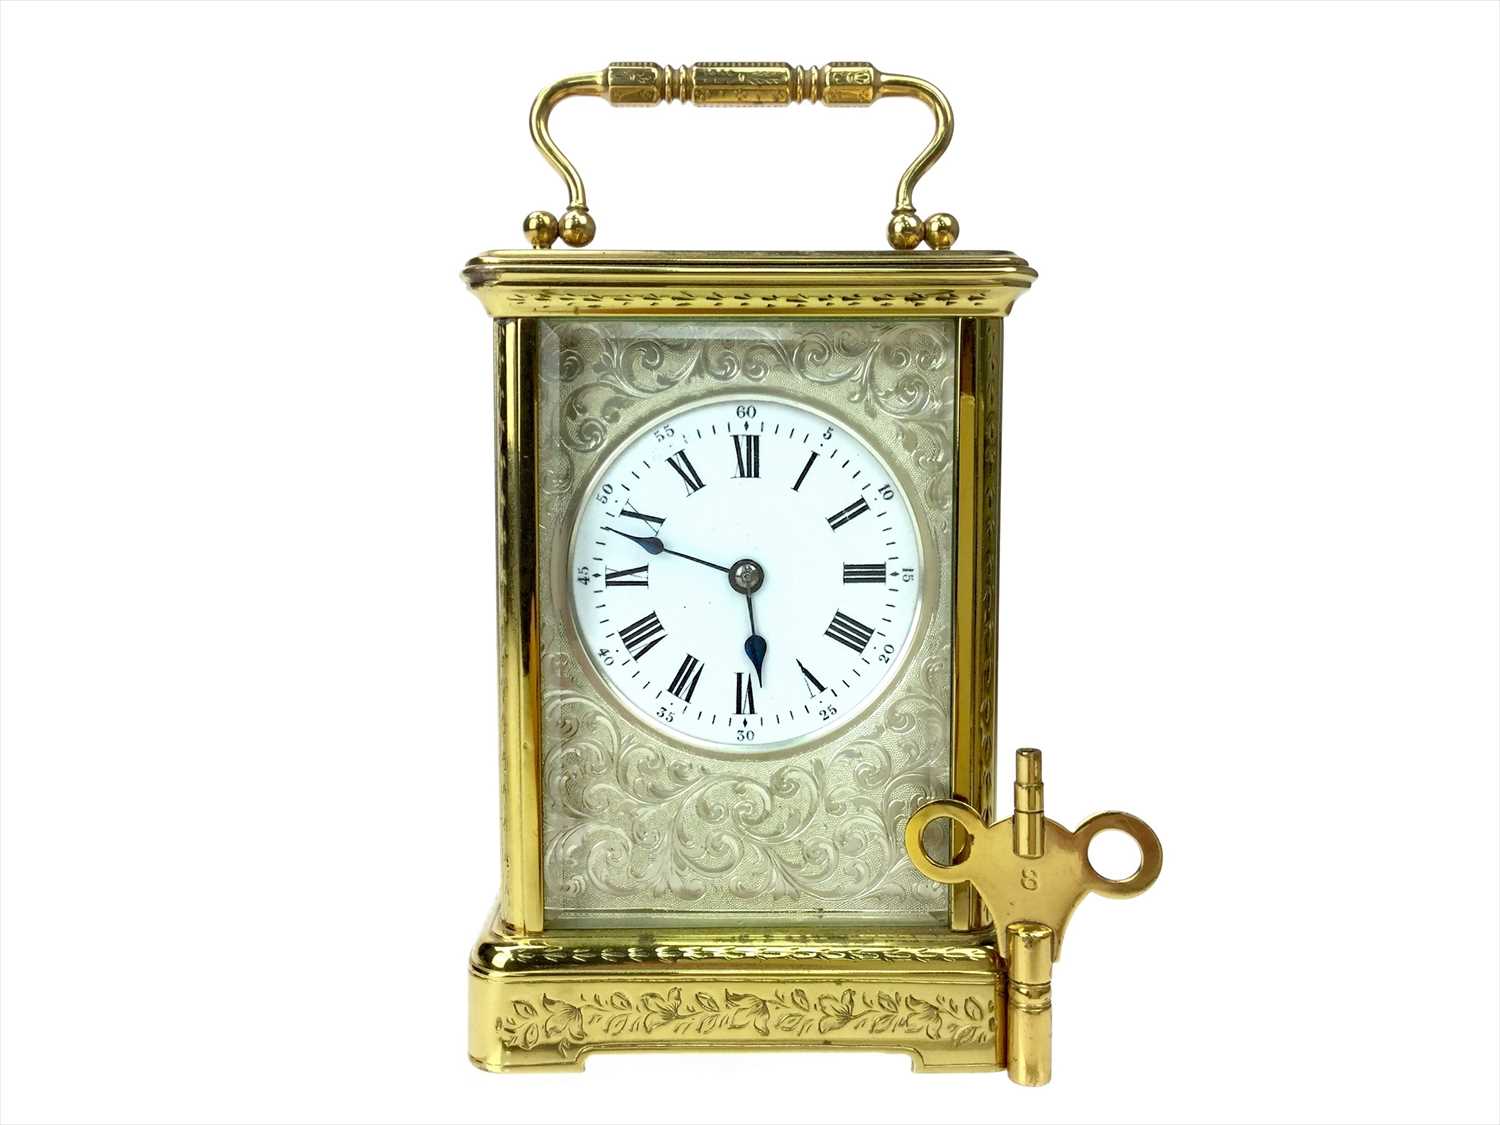 Lot 1115 - A LATE 19TH CENTURY FRENCH CARRIAGE CLOCK